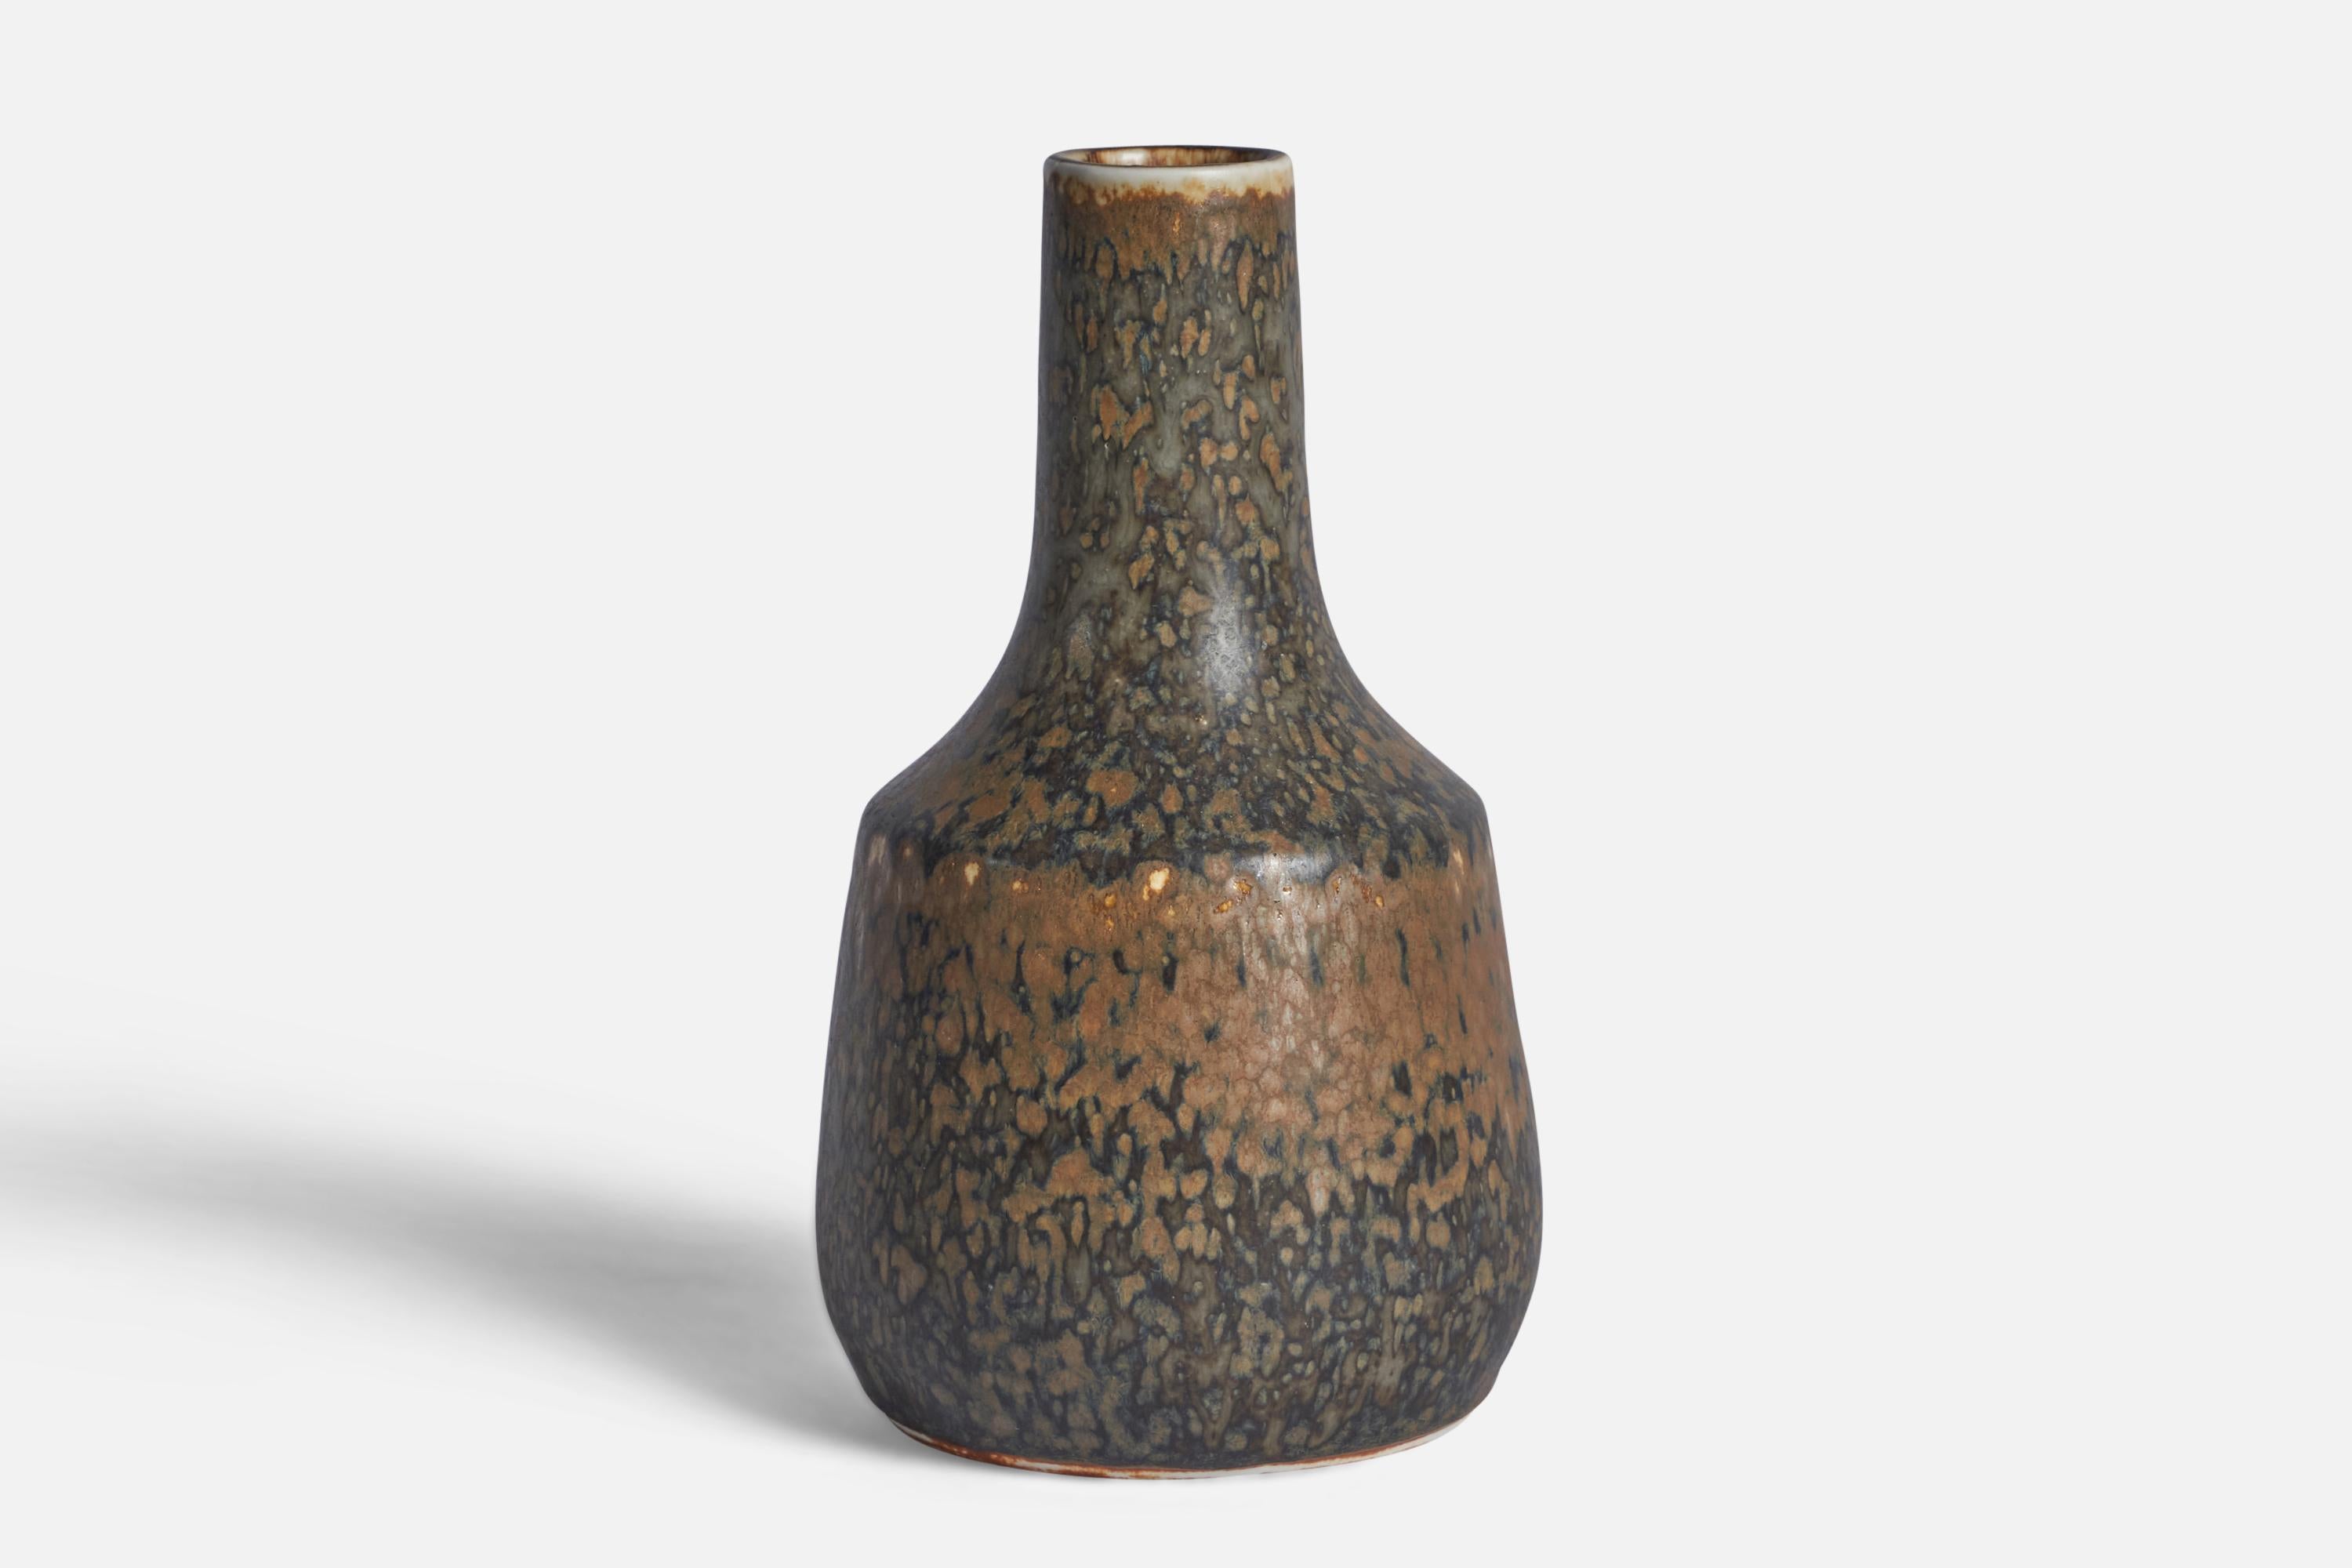 A brown and grey-glazed stoneware vase designed by Carl-Harry Stålhane and produced by Rörstrand, Sweden, 1950s.